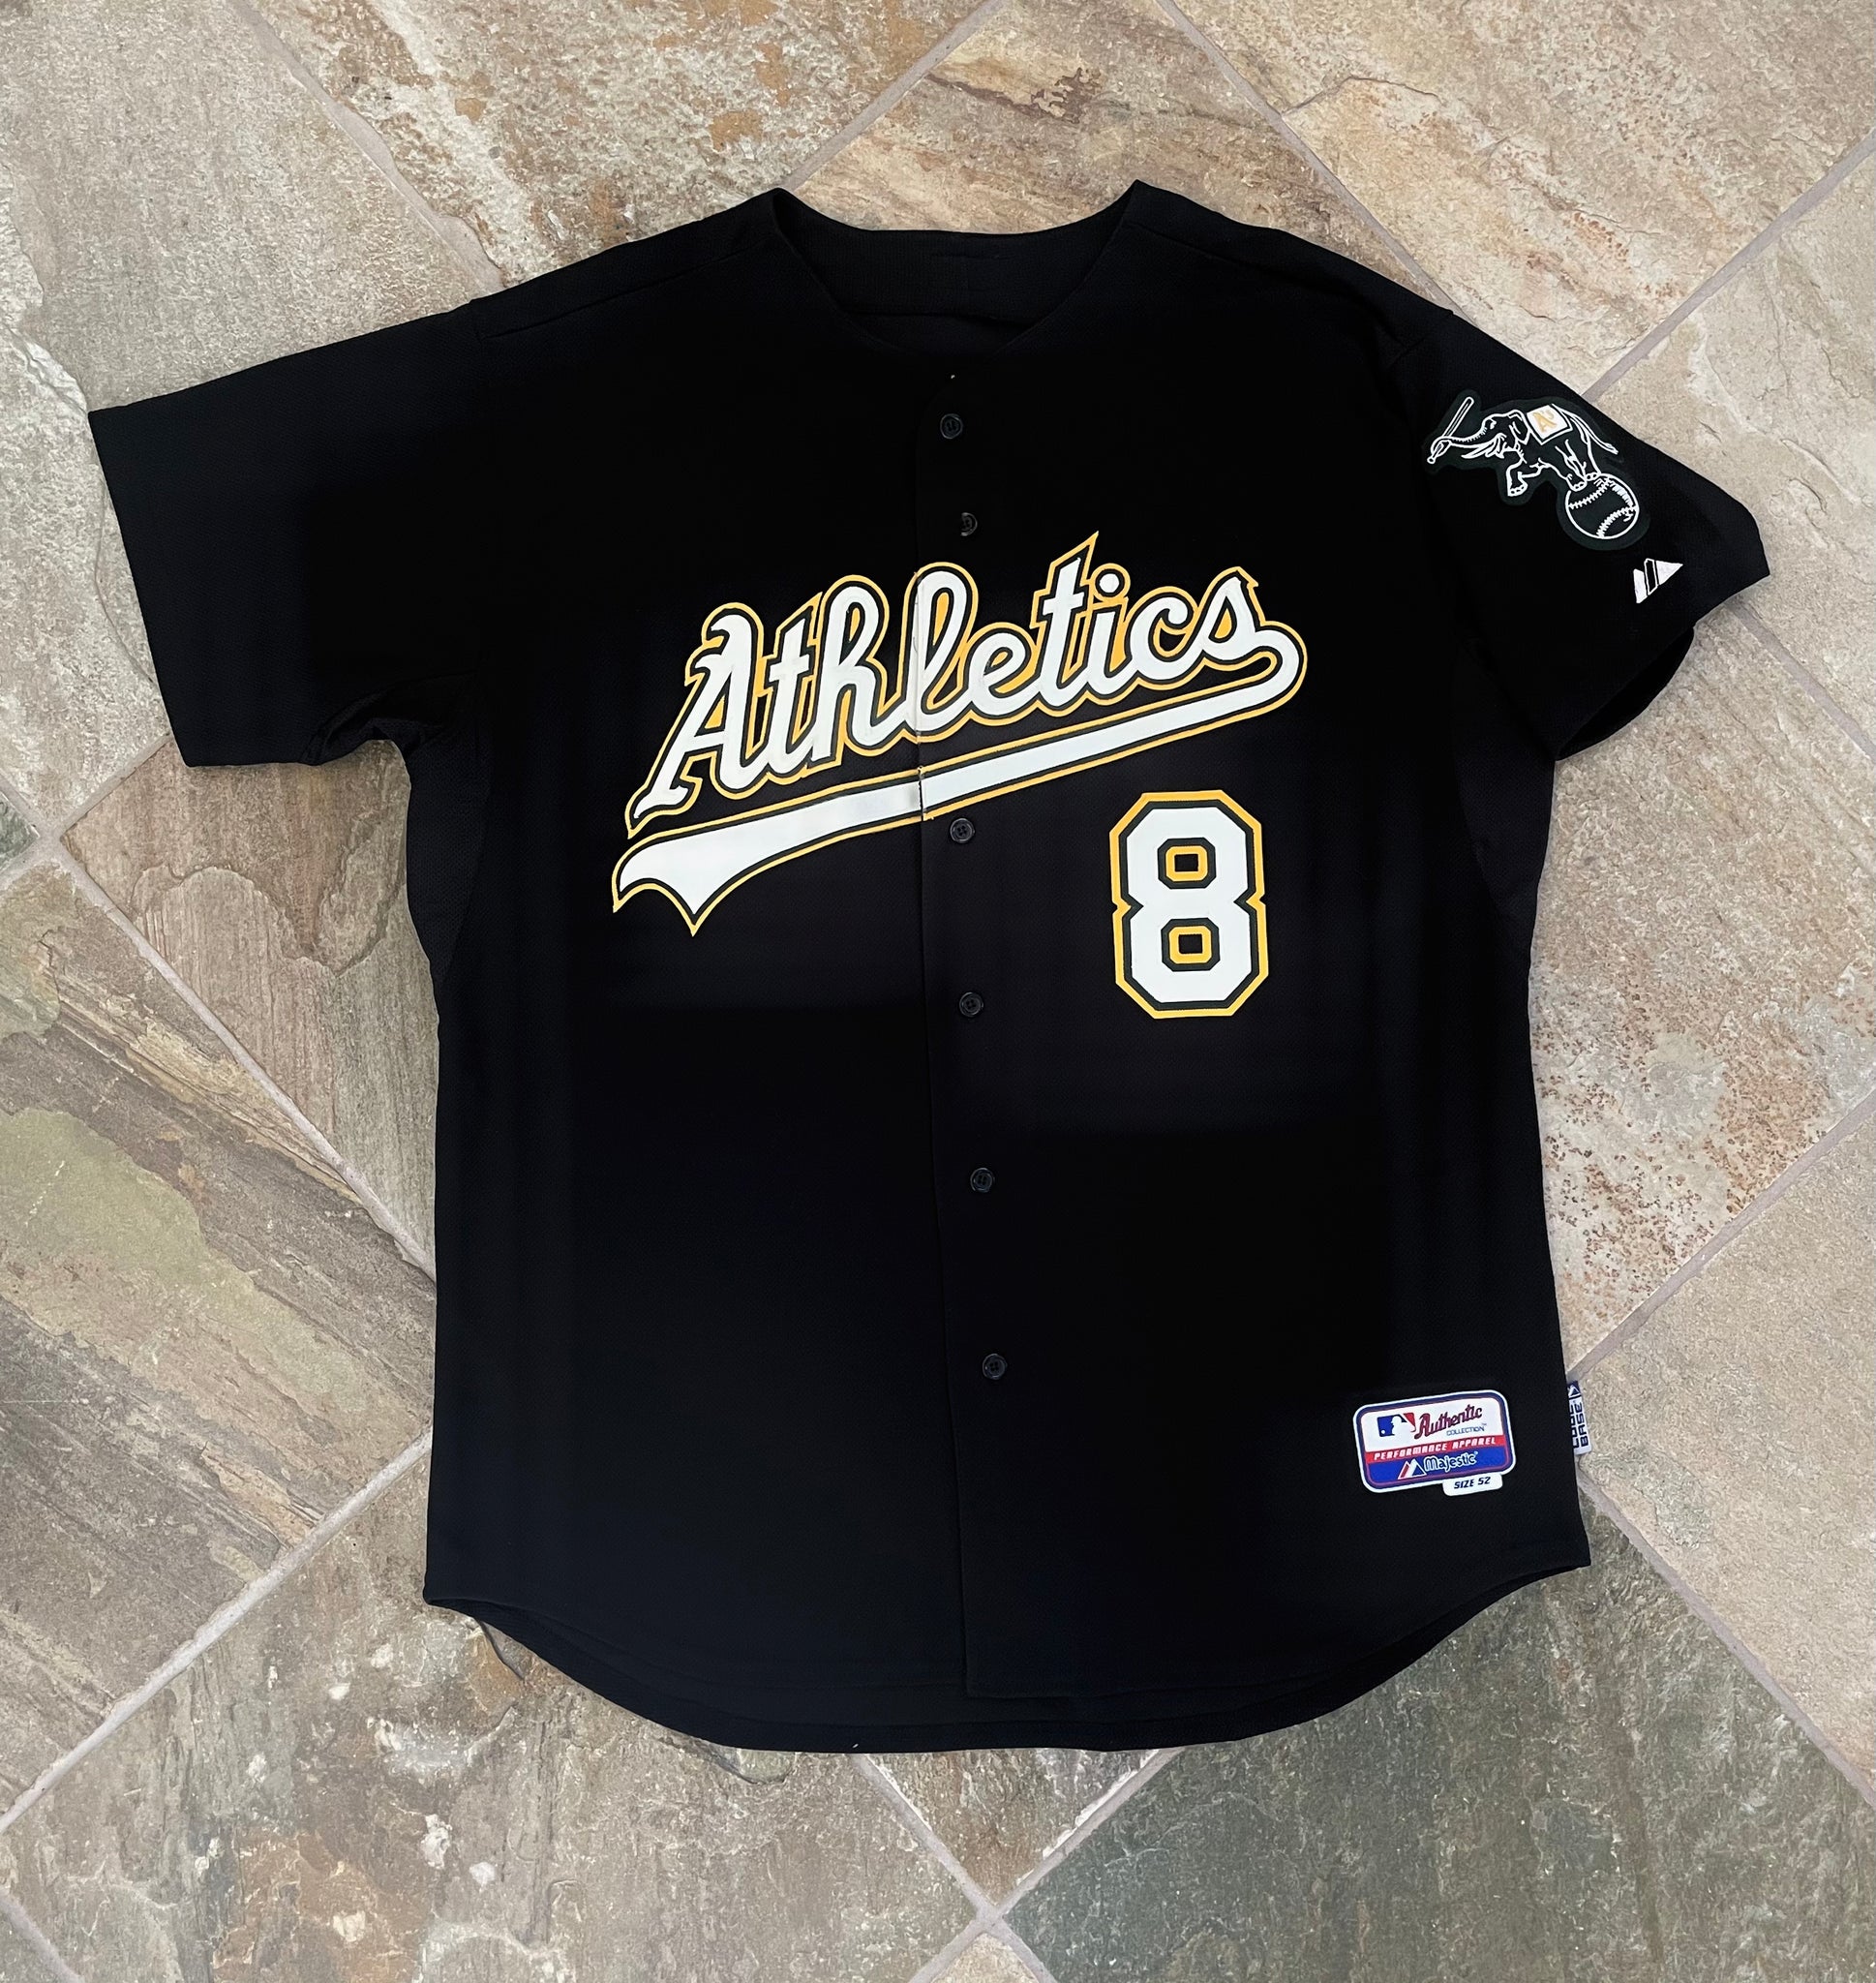 Oakland Athletics Majestic Official Cool Base Jersey - White